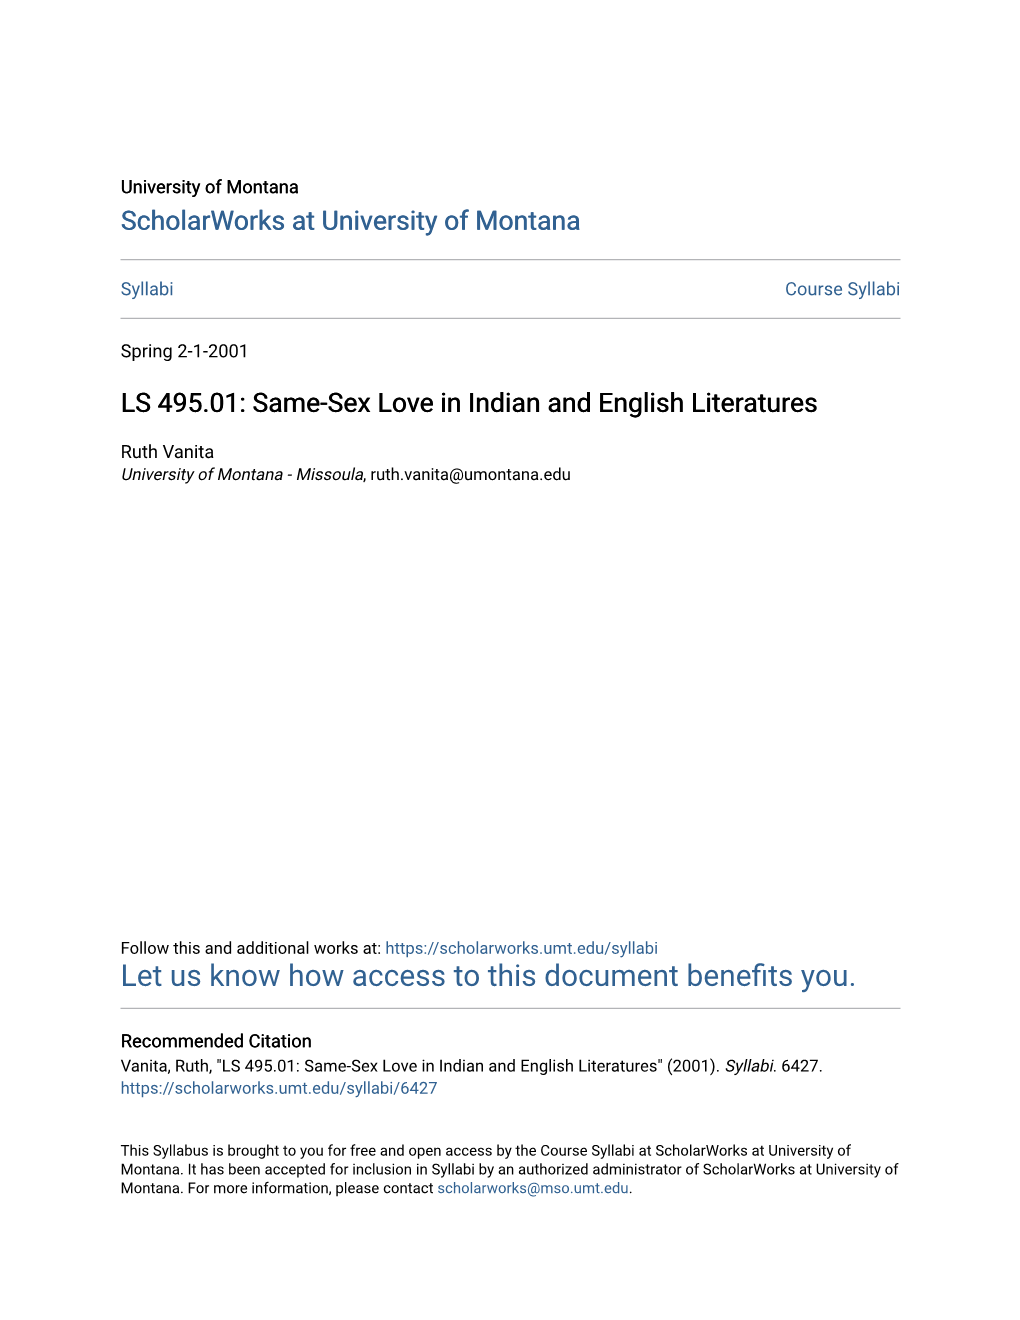 LS 495.01: Same-Sex Love in Indian and English Literatures